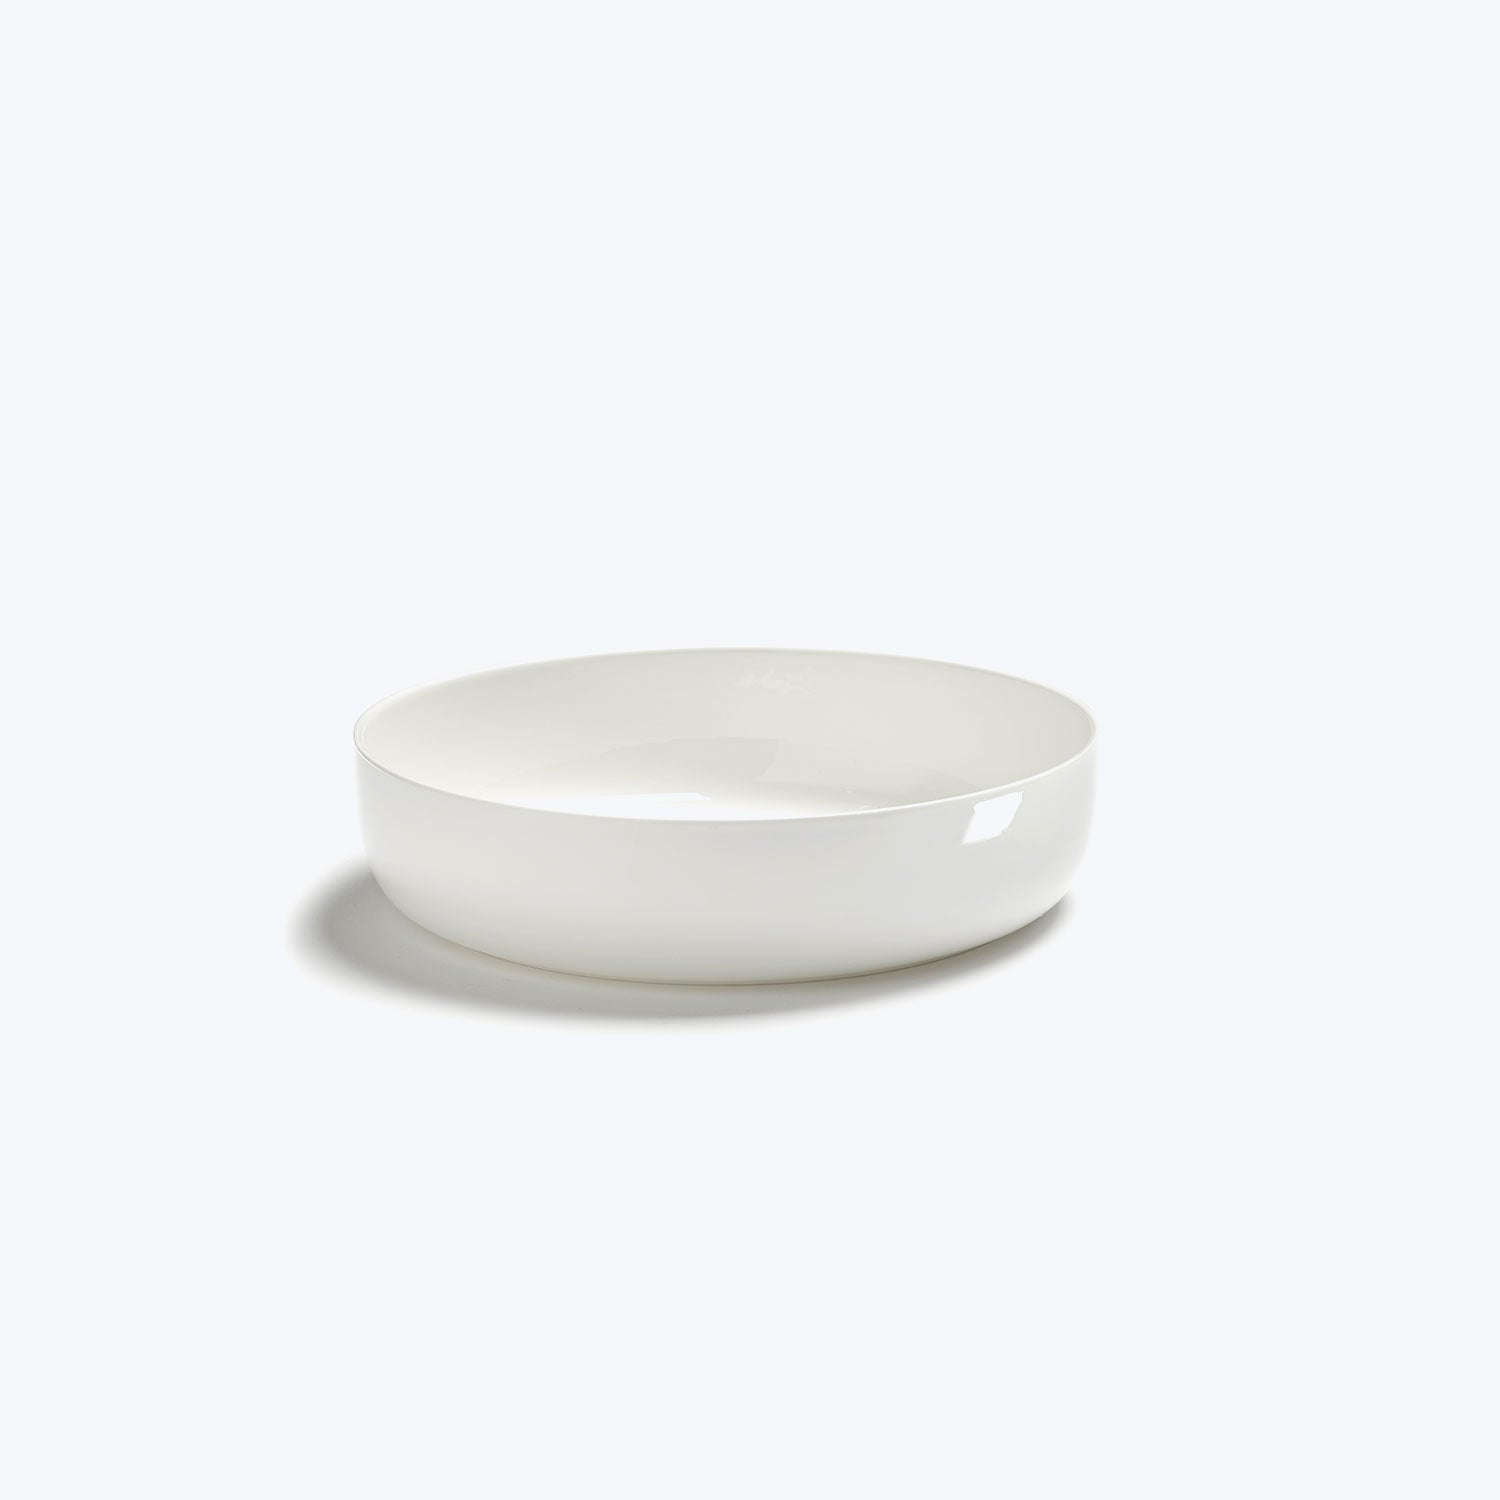 Piet Boon Base Tableware Collection-Glazed White-XLarge Plate (Set of 4)